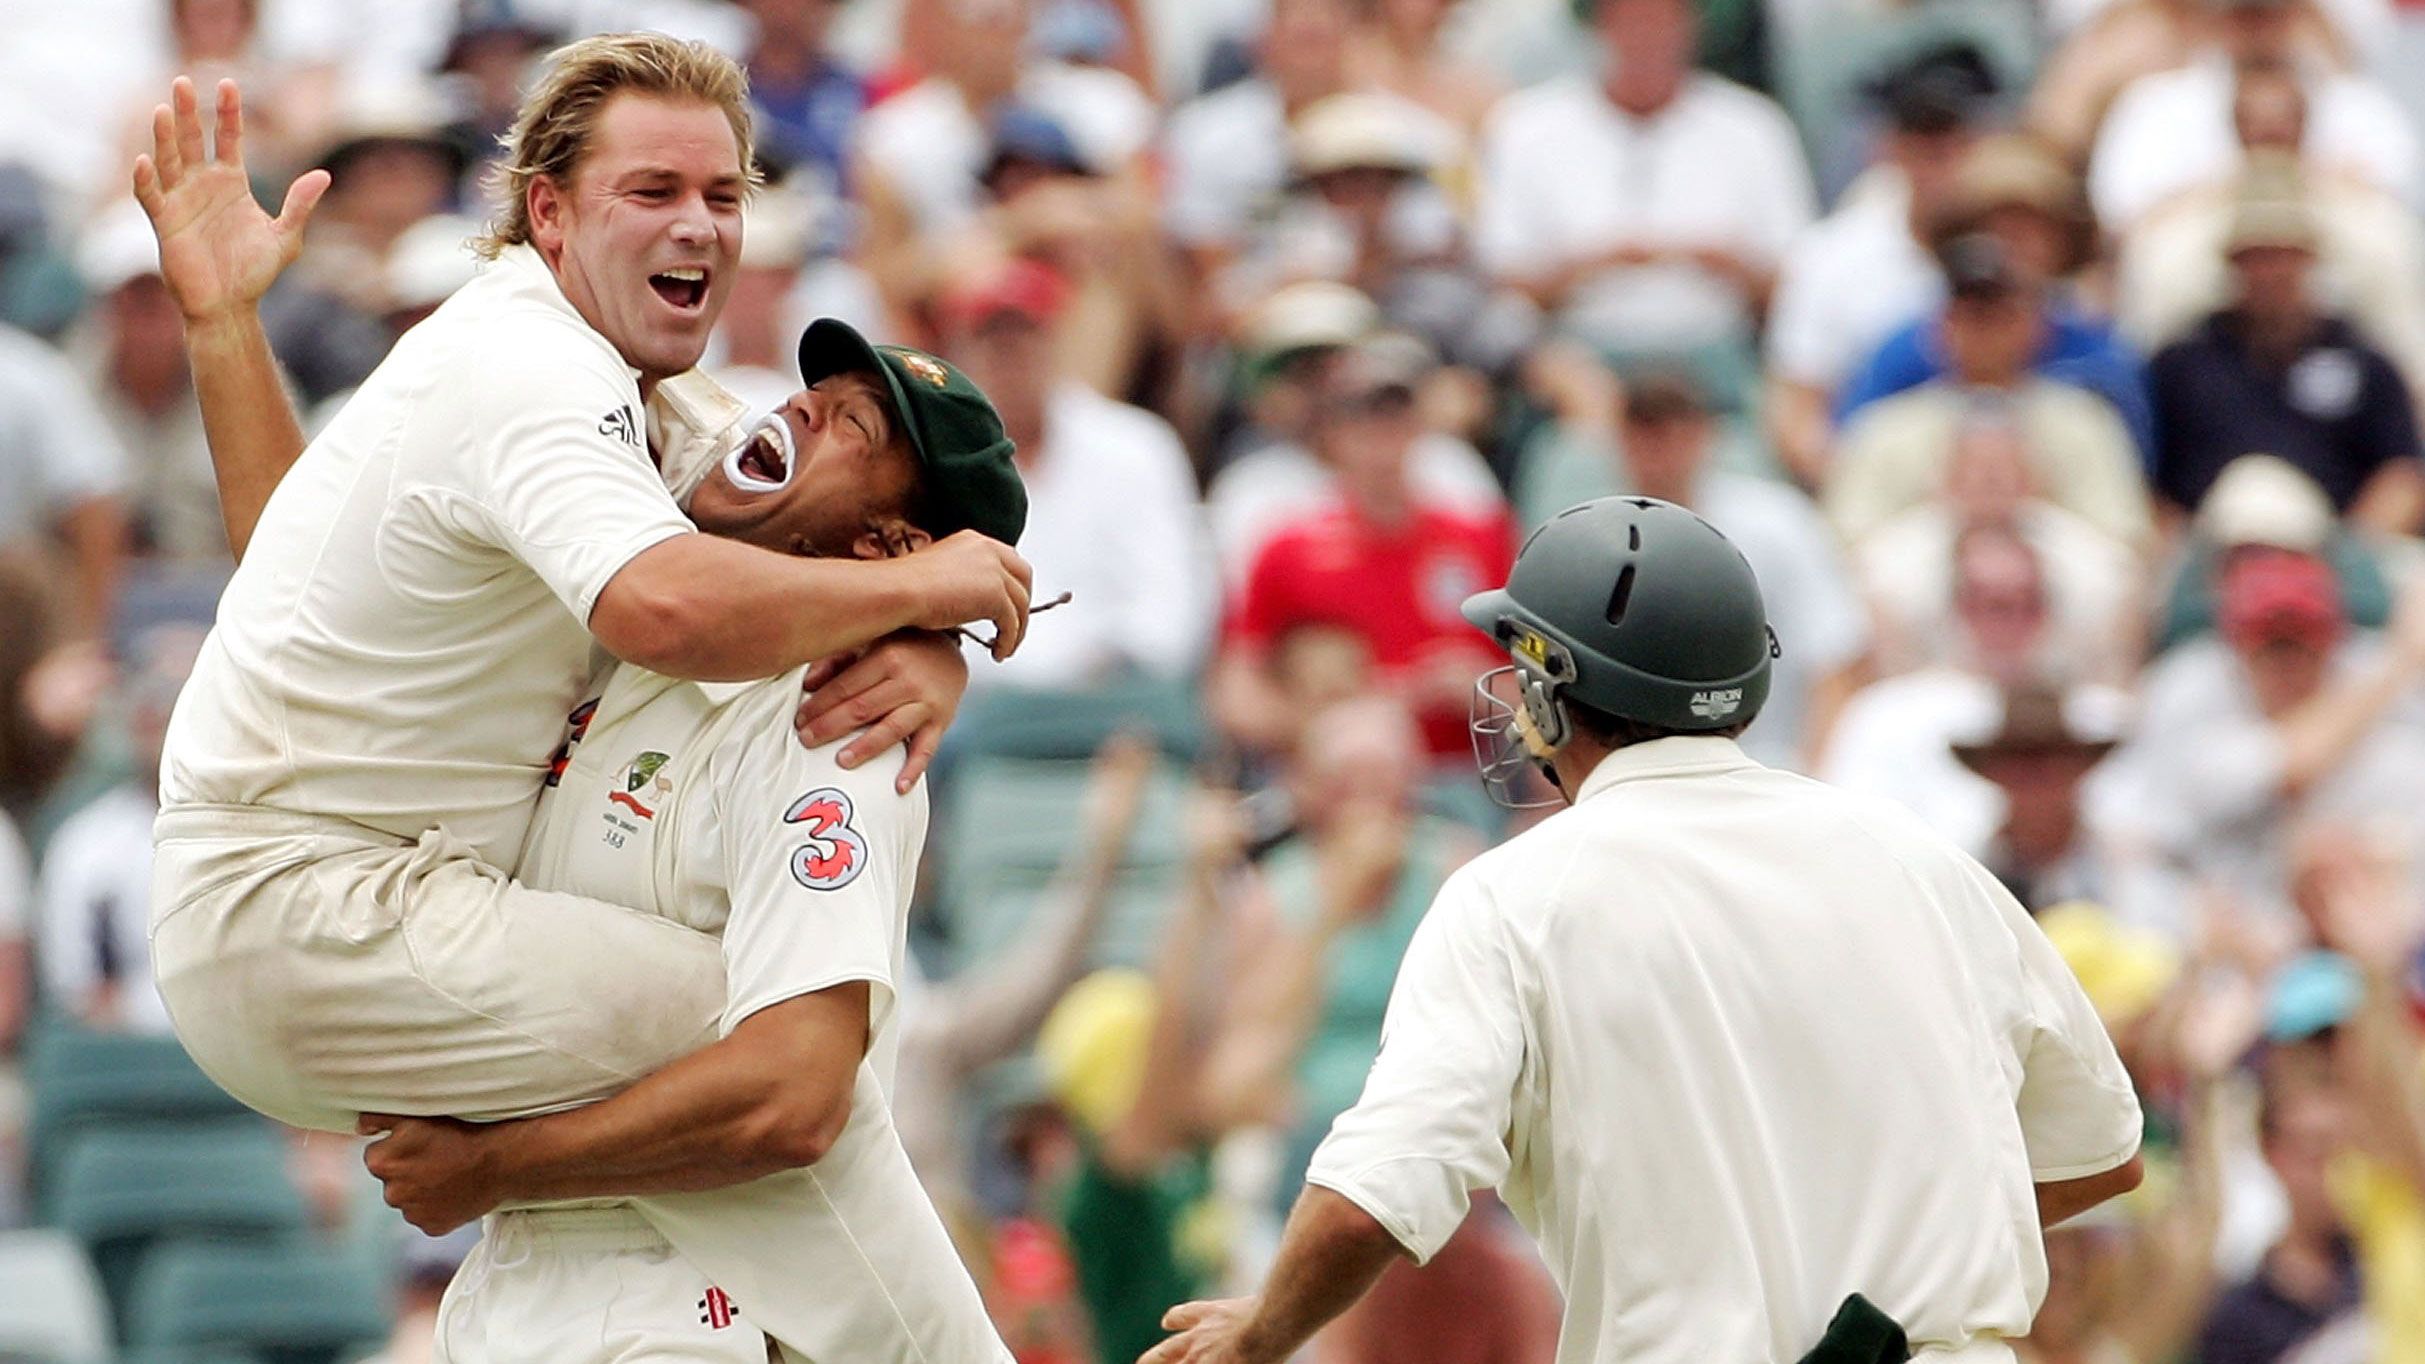 Shane Warne is embraced by Andrew Symonds after the dismissal of Monty Panesar during the Perth Test in the 2006/07 Ashes series.